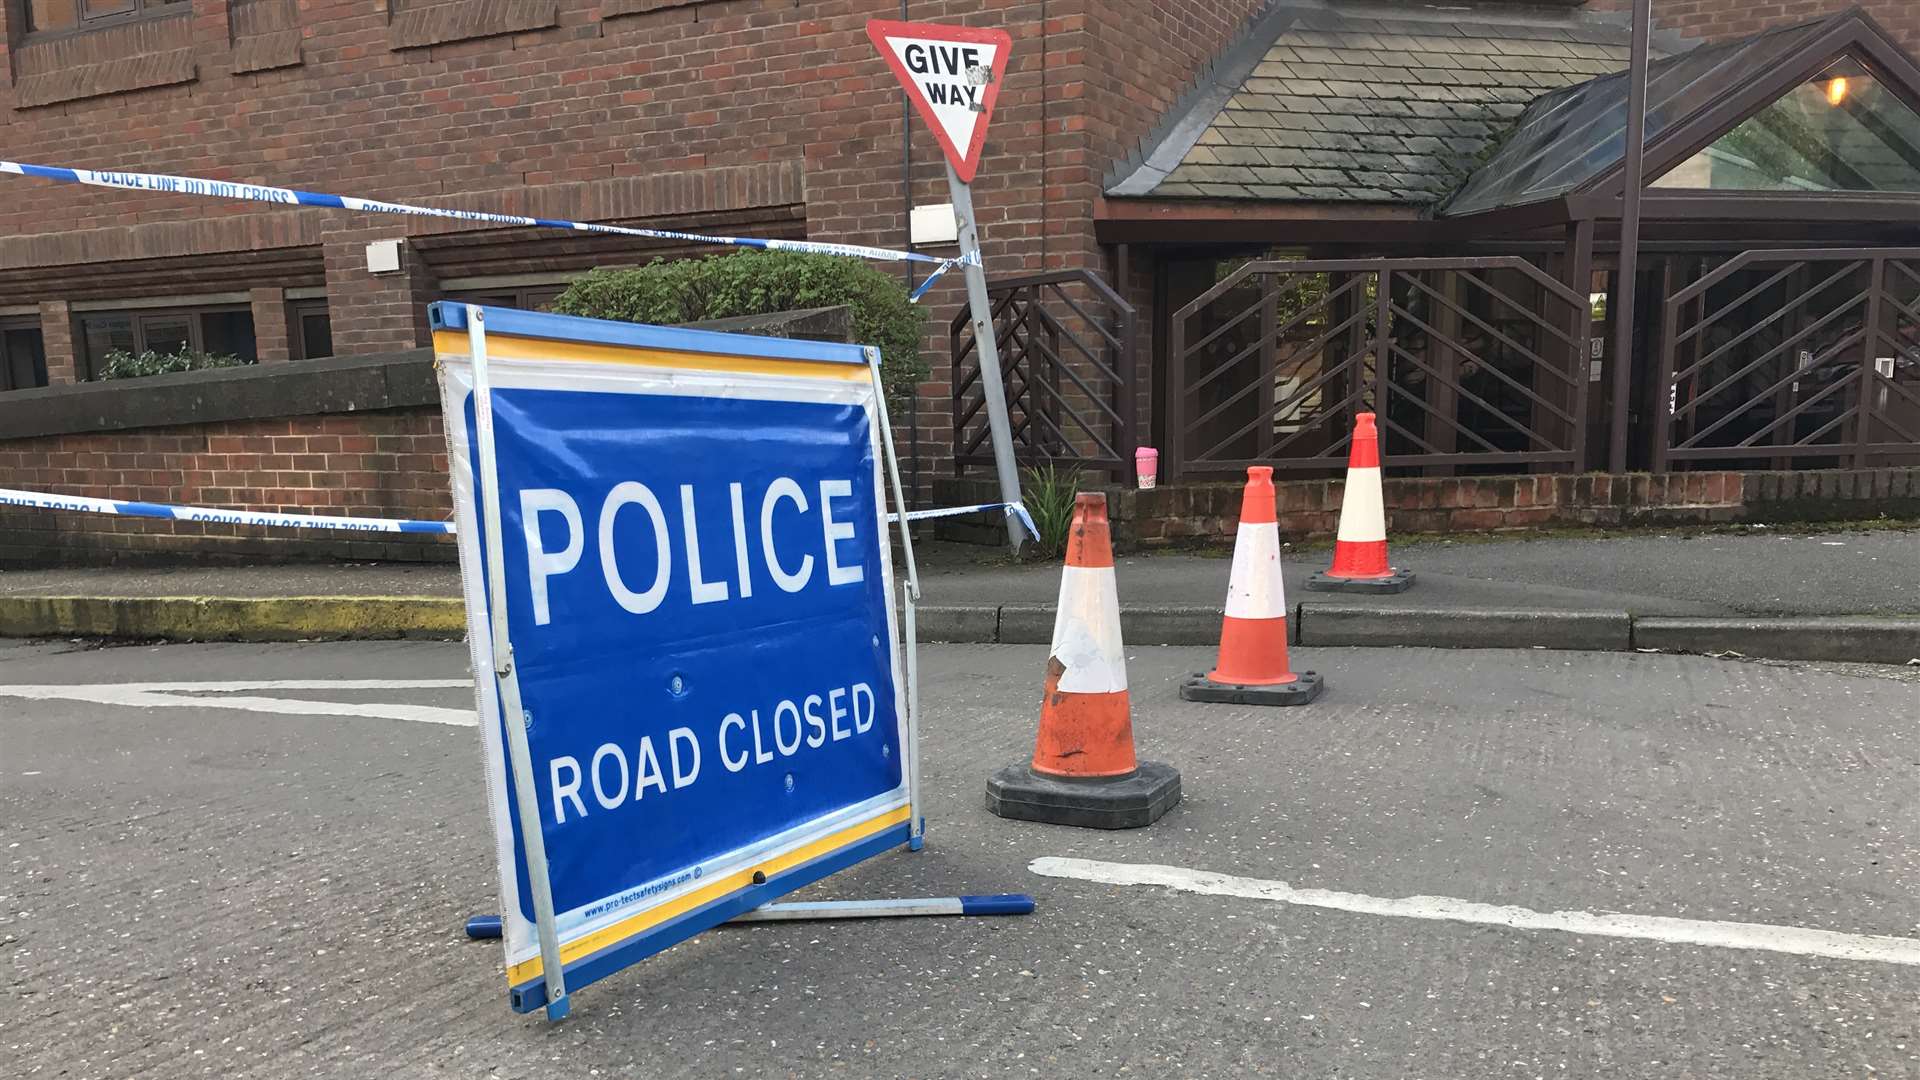 The car park was sealed off by police after Mr Metcalfe's body was found